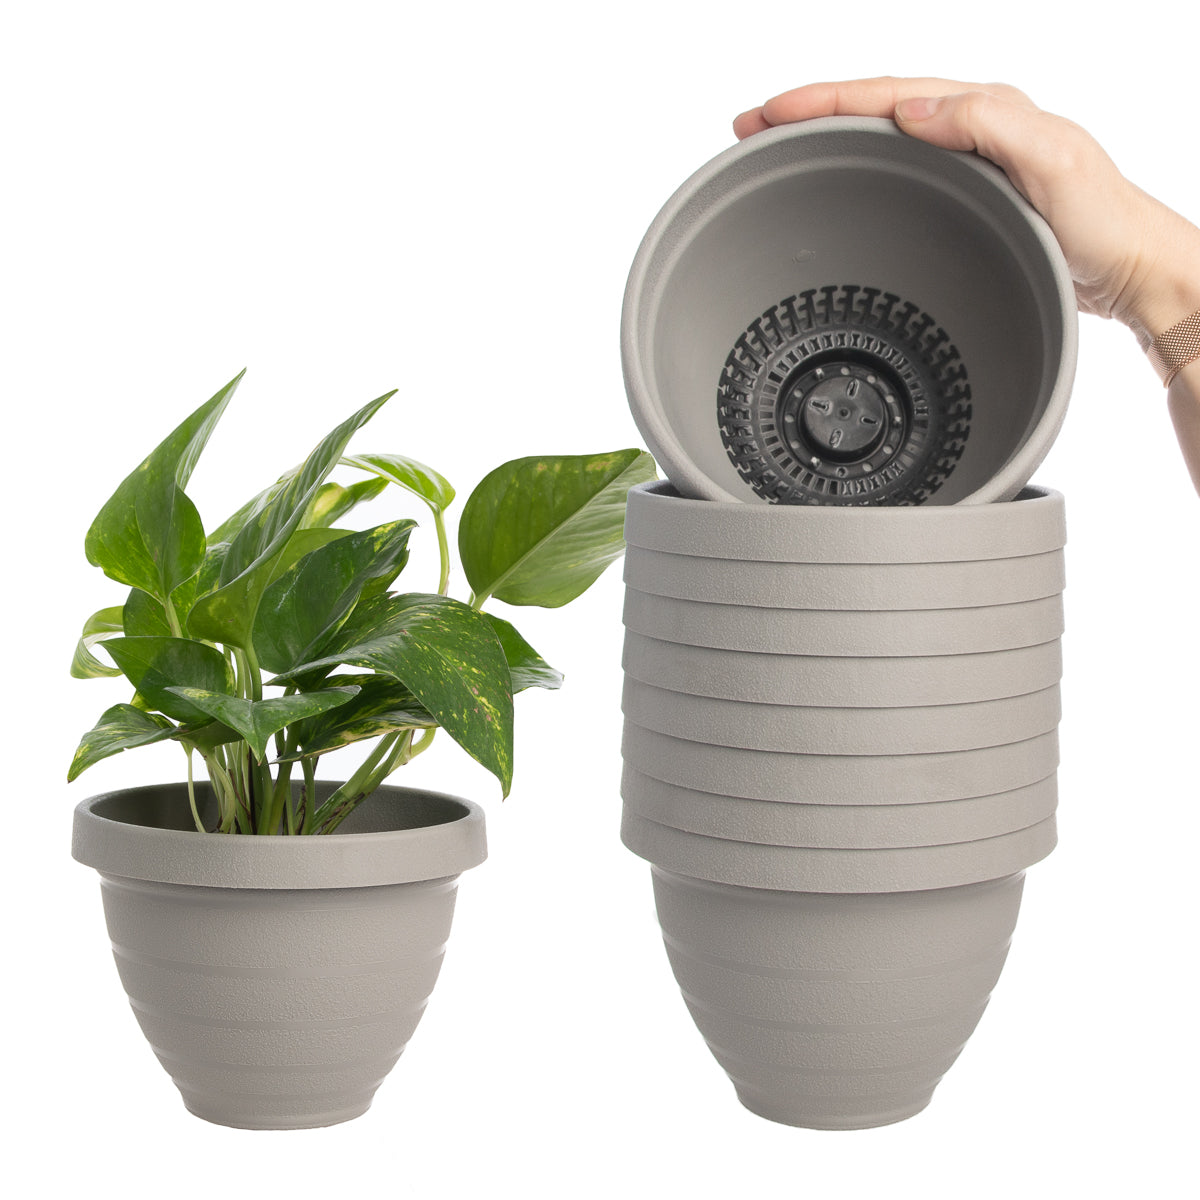 10pk Self-Watering Easy Care 7.5” Planter Pots By HC Companies